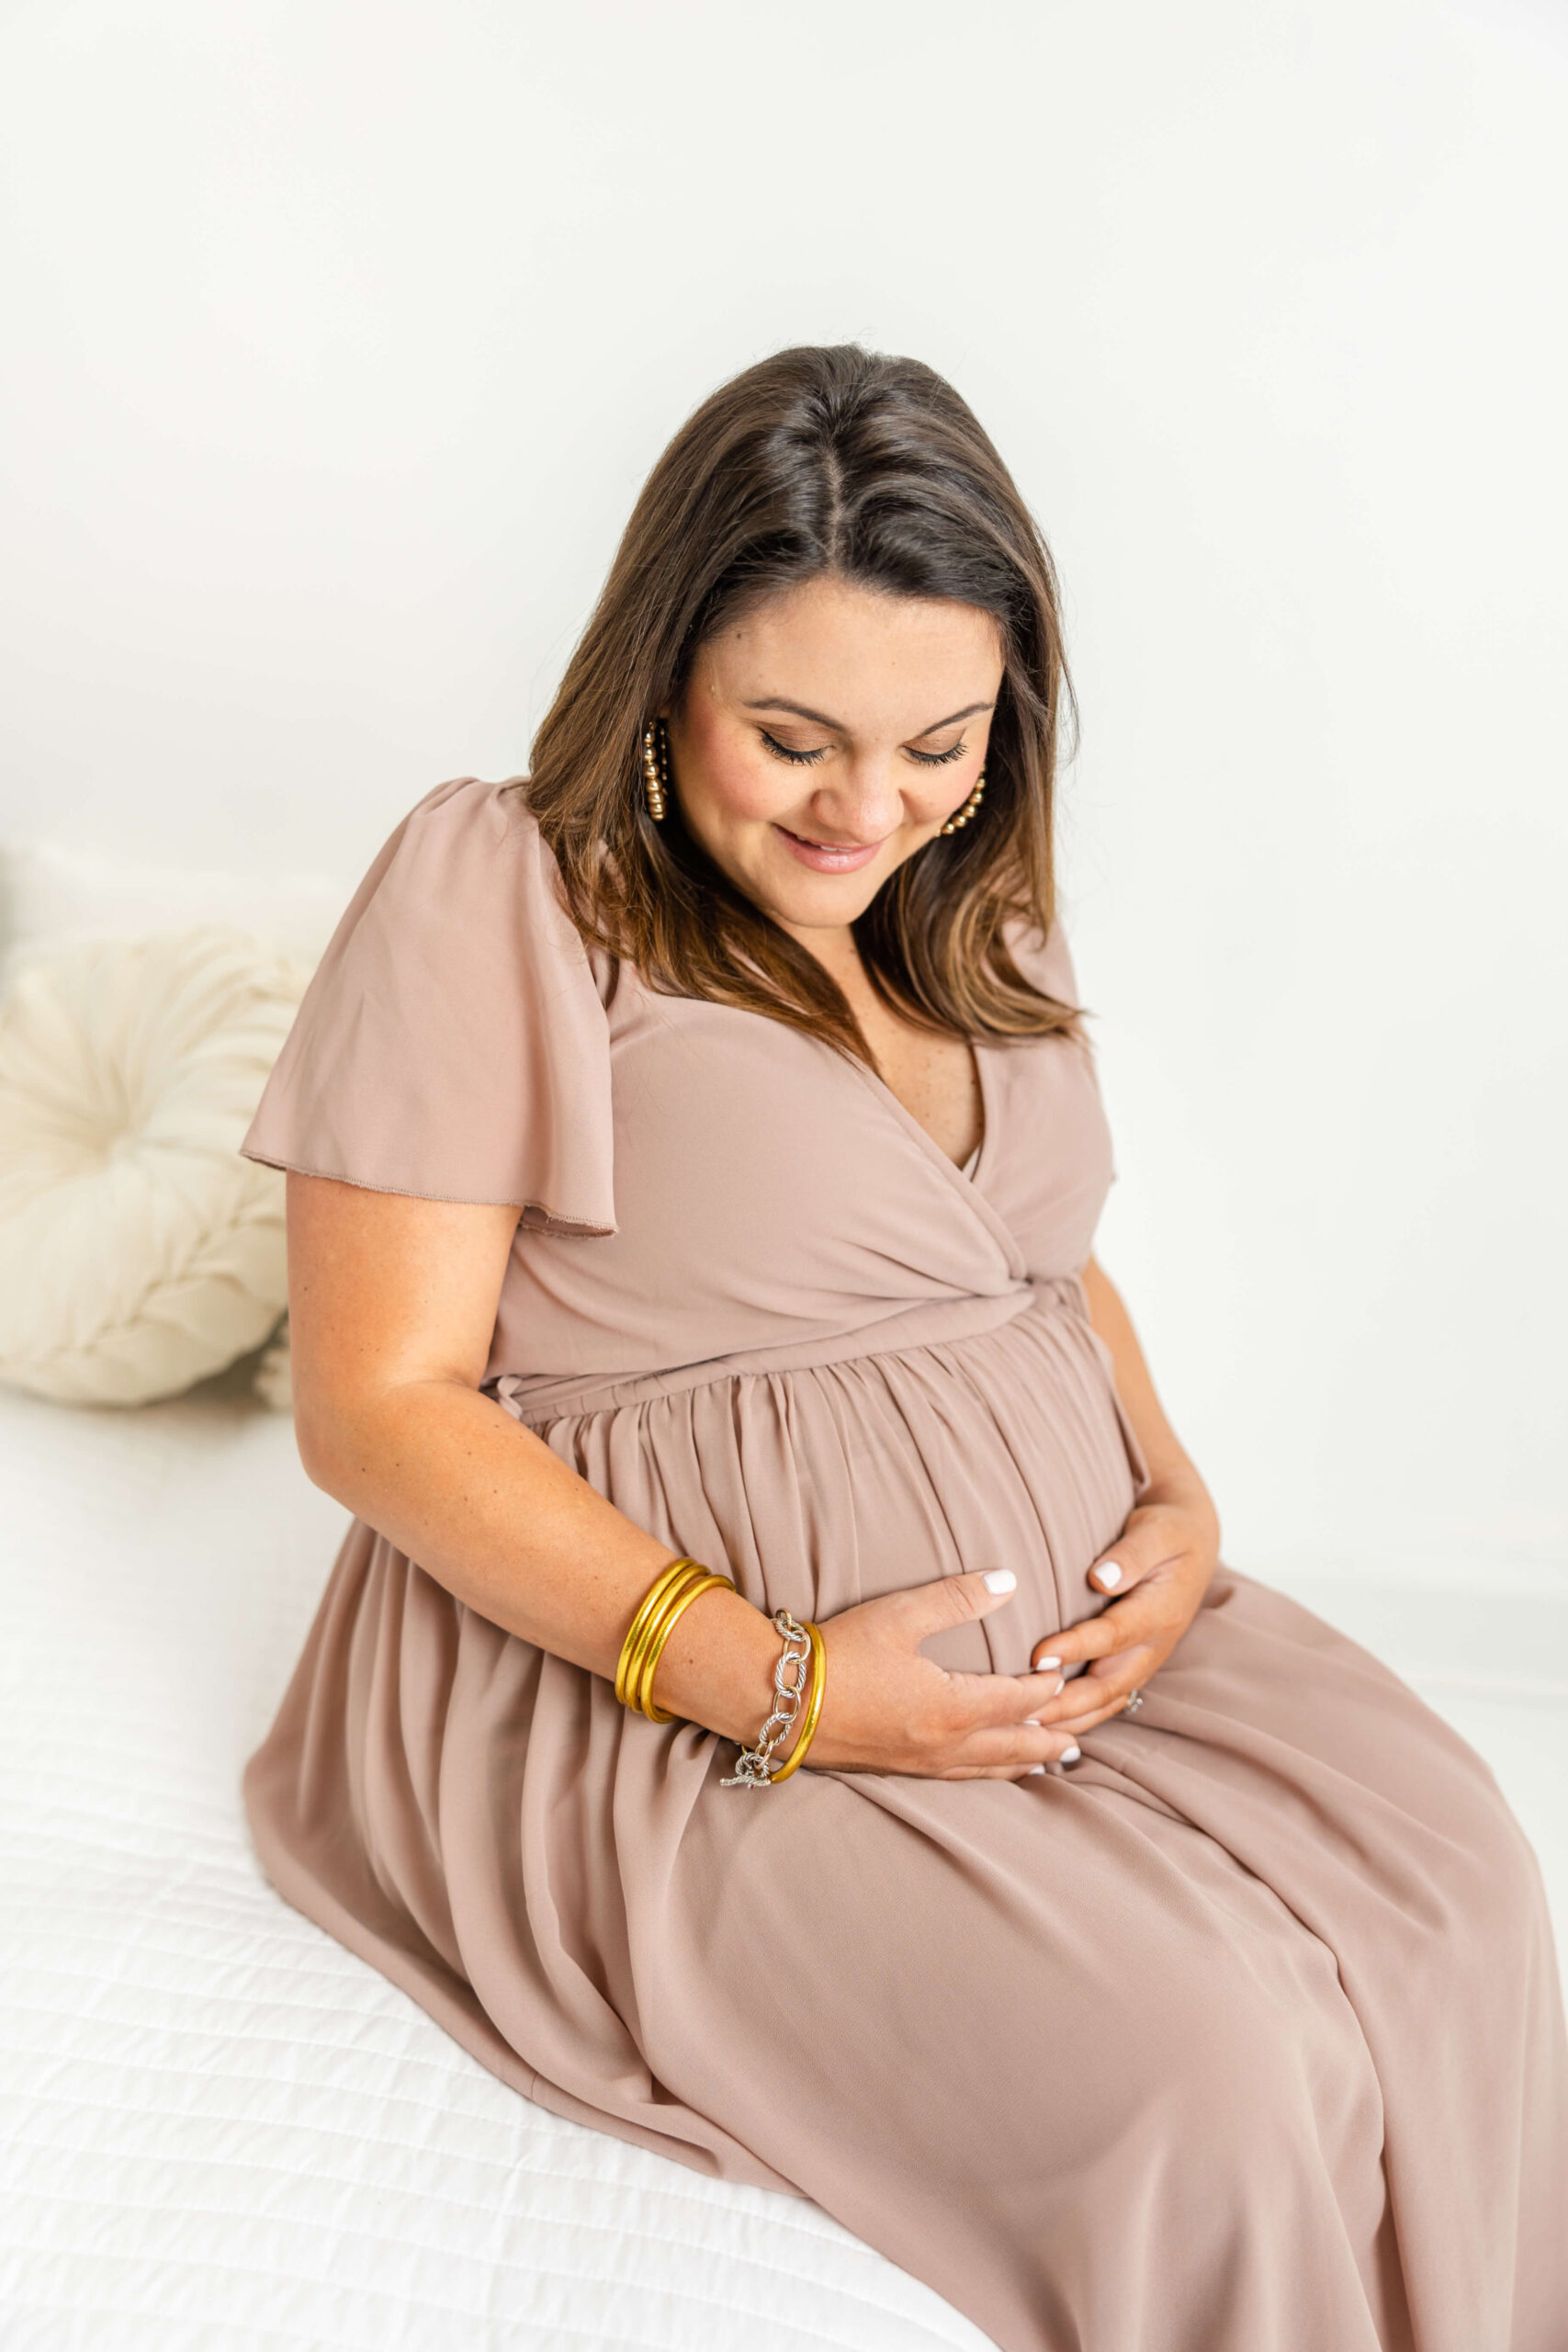 Captured pregnant mom in mauve dress sitting on a white bed.